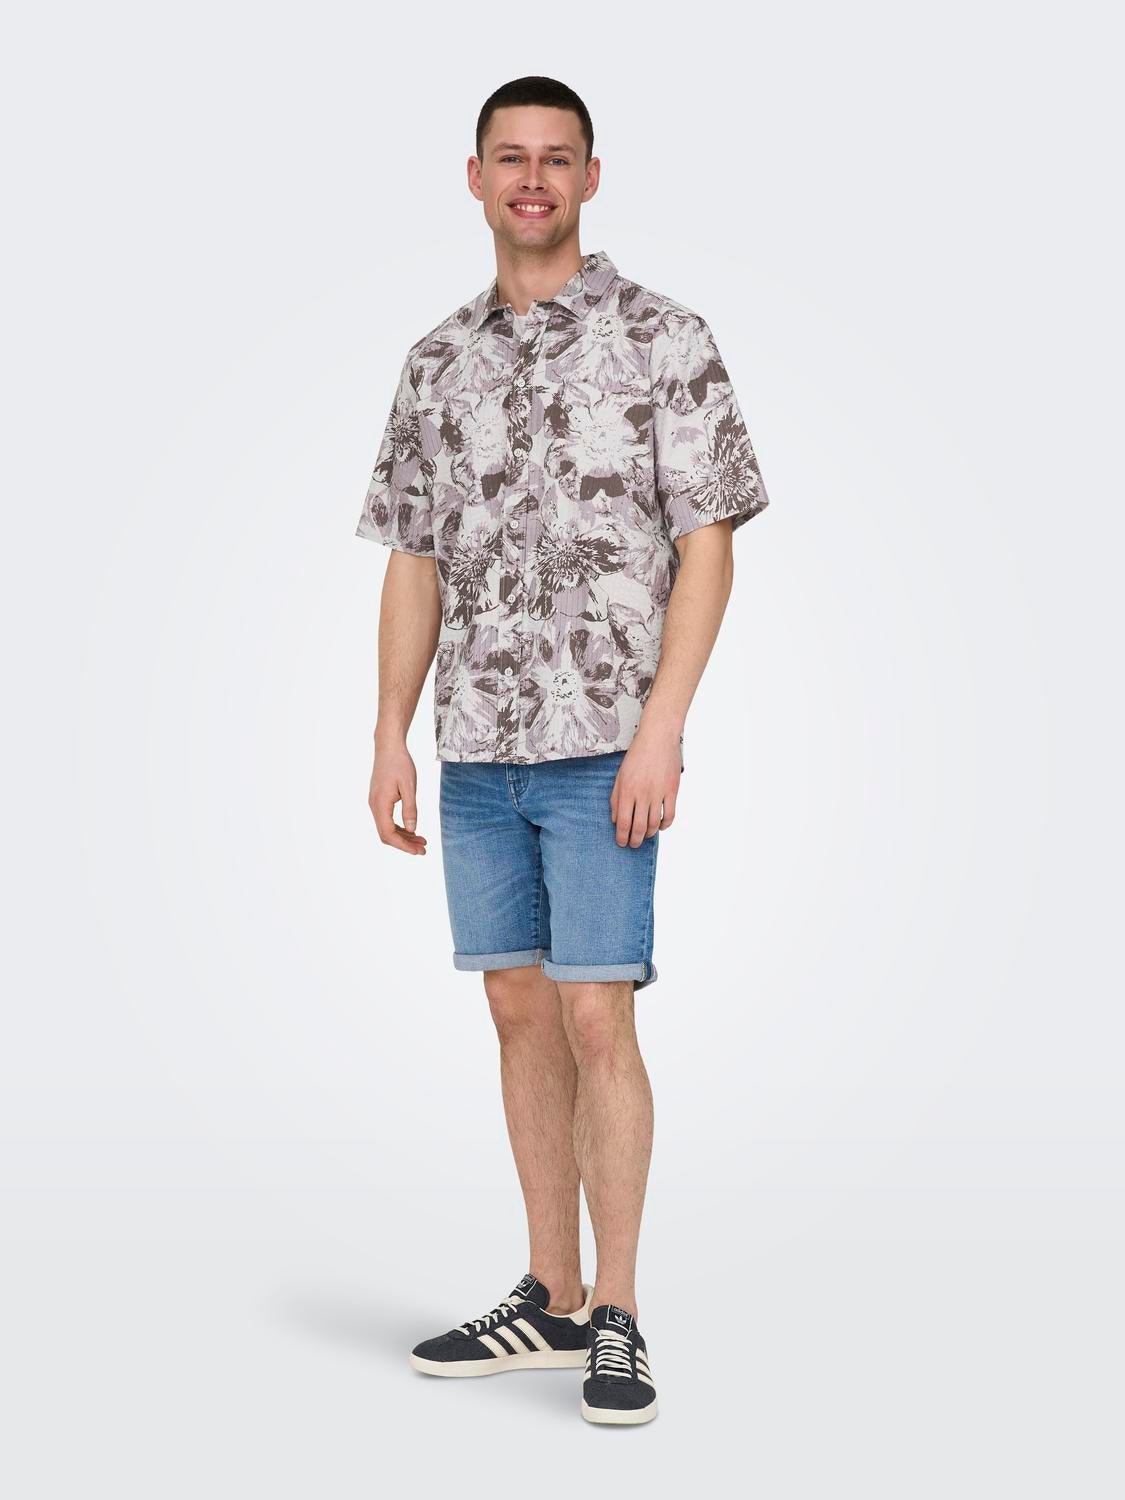 ONLY & SONS Short sleeved shirt with pattern -Raindrops - 22028356